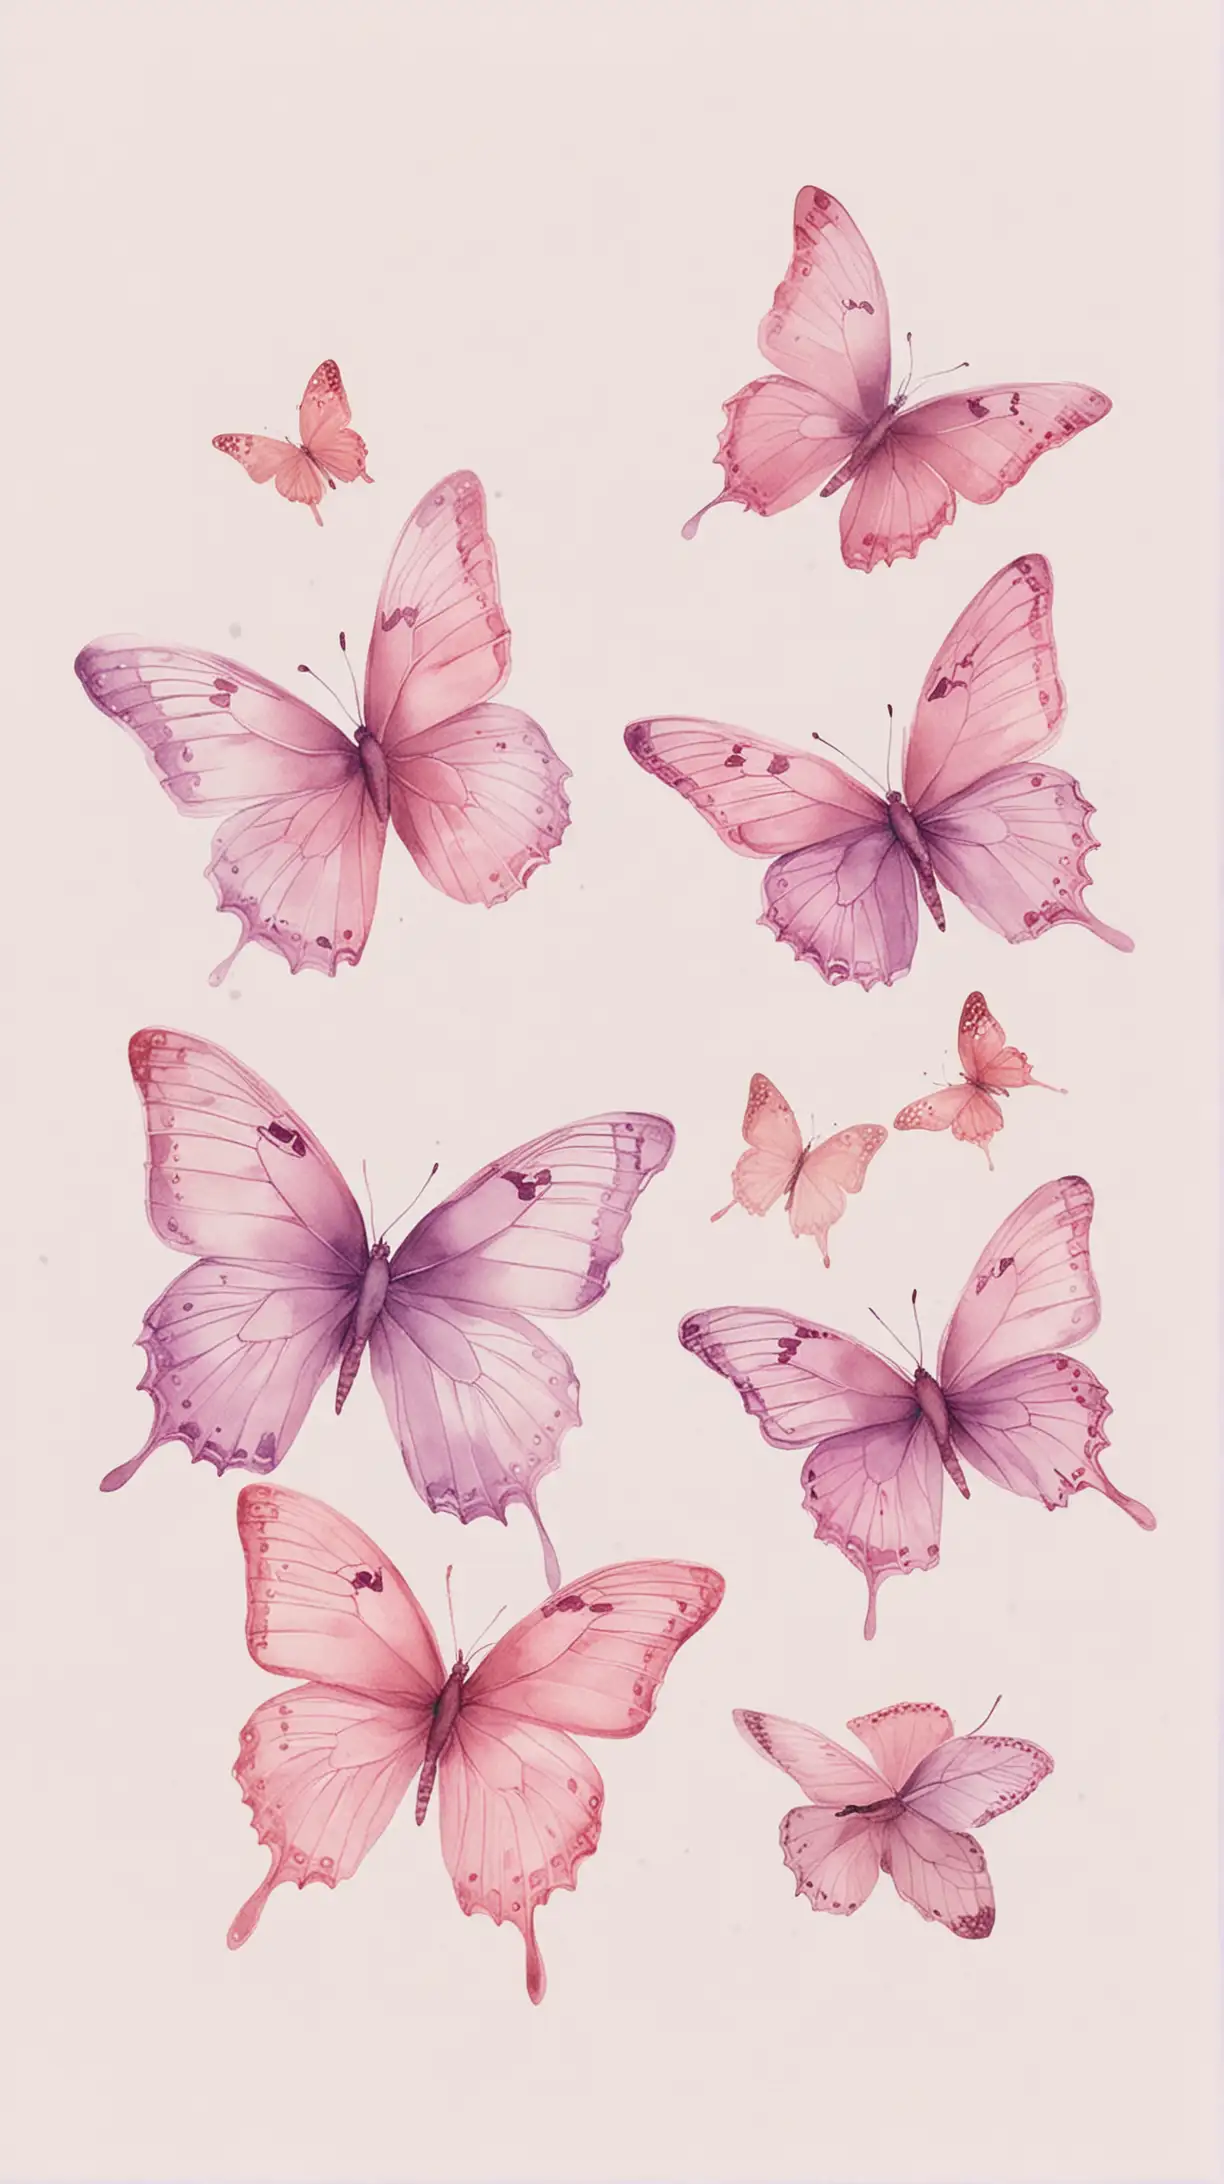 Pastel Pink and Lilac Butterflies in Watercolour Style on White Background